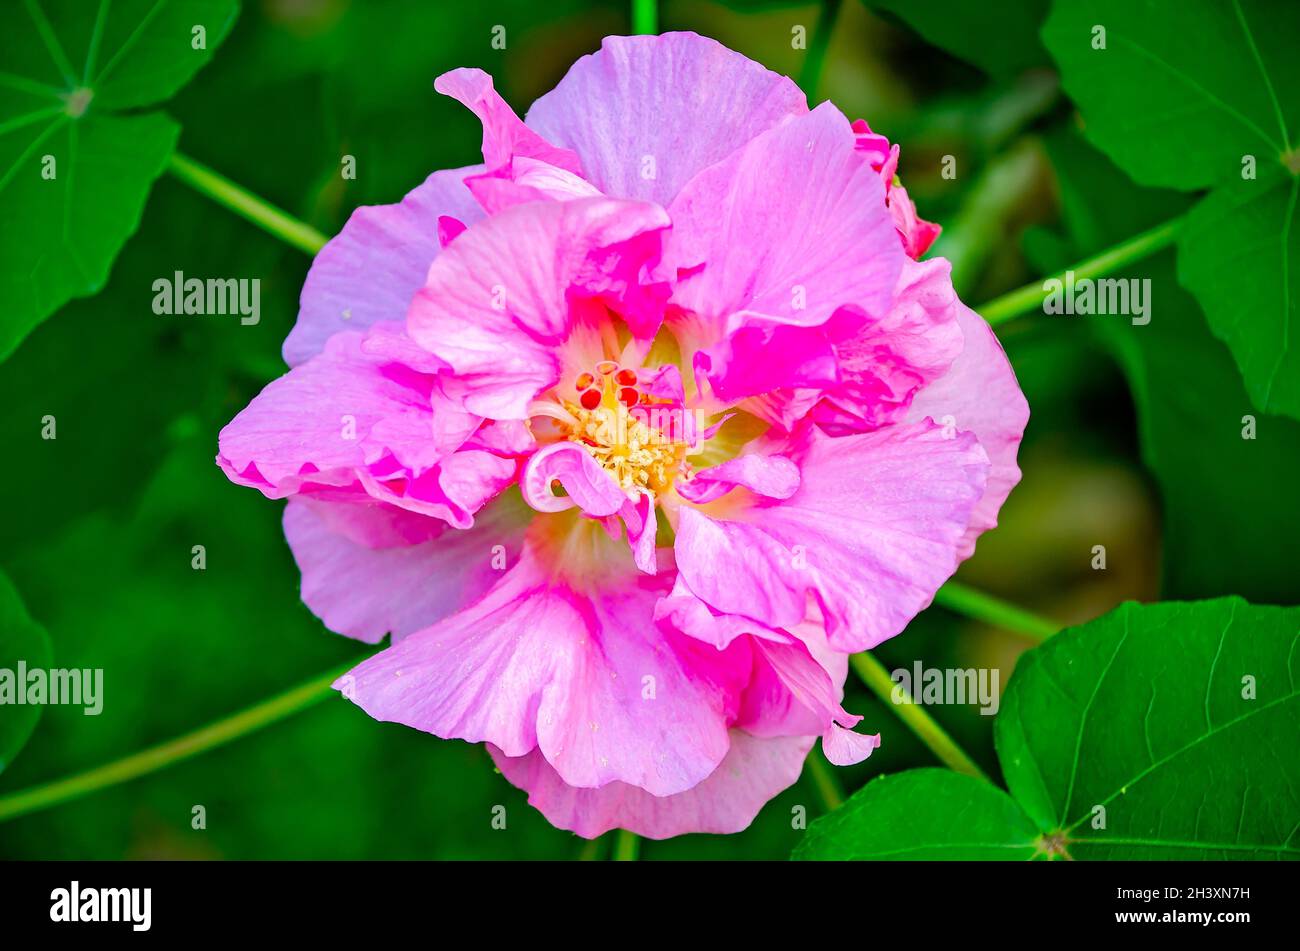 A Confederate rose (Hibiscus mutabilis) blooms, Oct. 23, 2021, in Fairhope, Alabama. The Confederate rose is native to China. Stock Photo